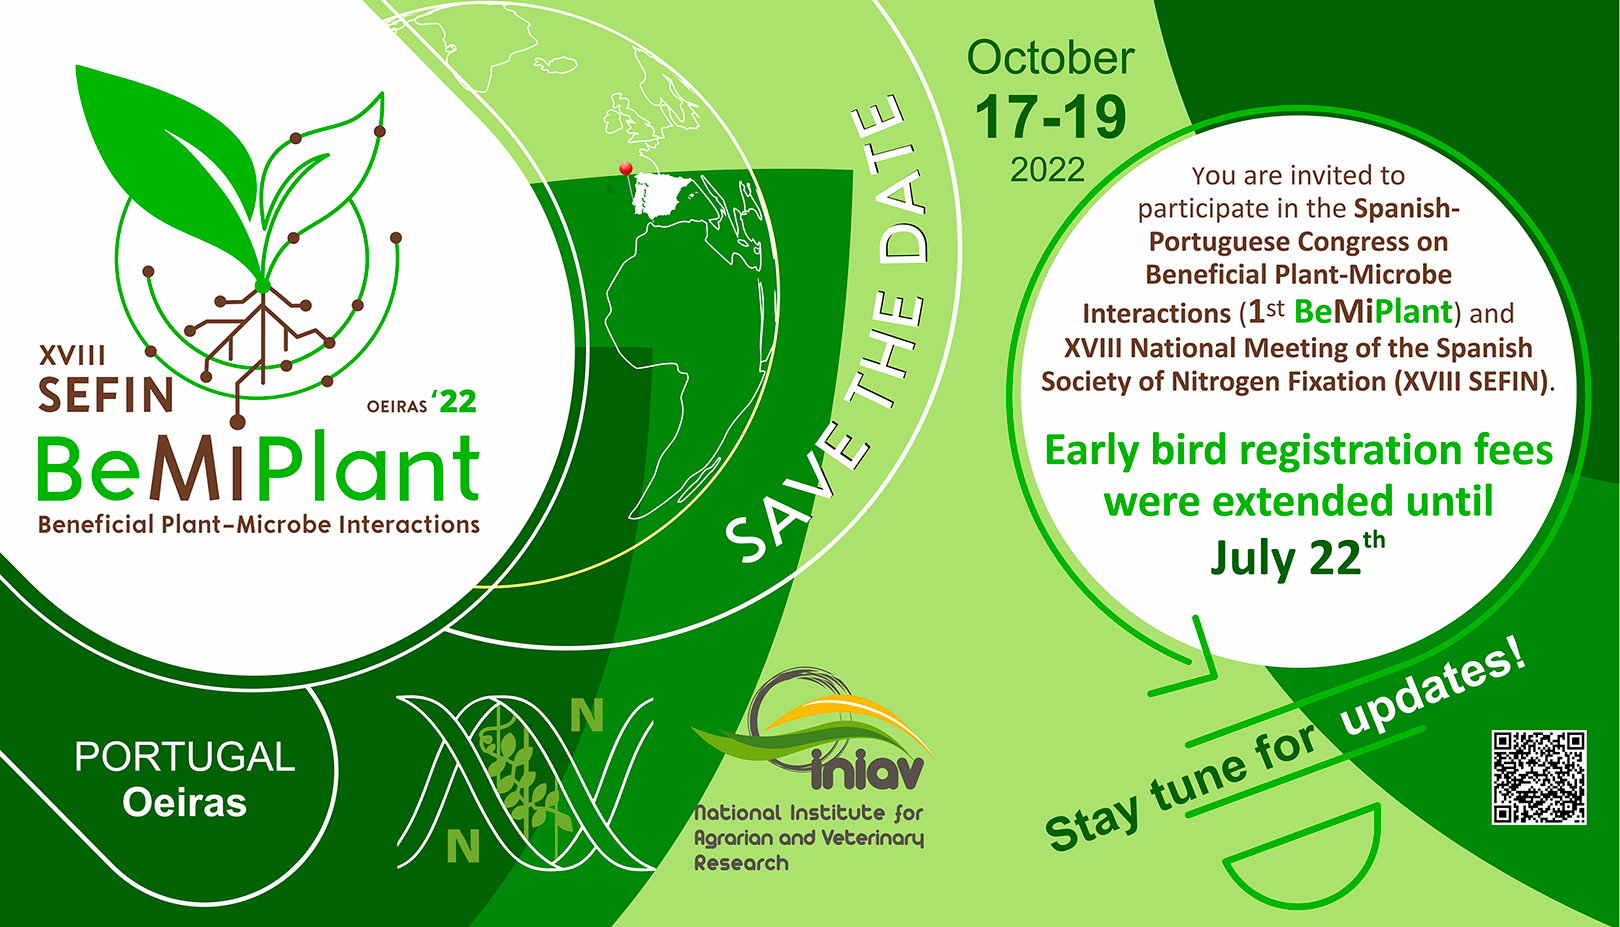 BeMiPlant - Early bird registration fees were extended until July 22th